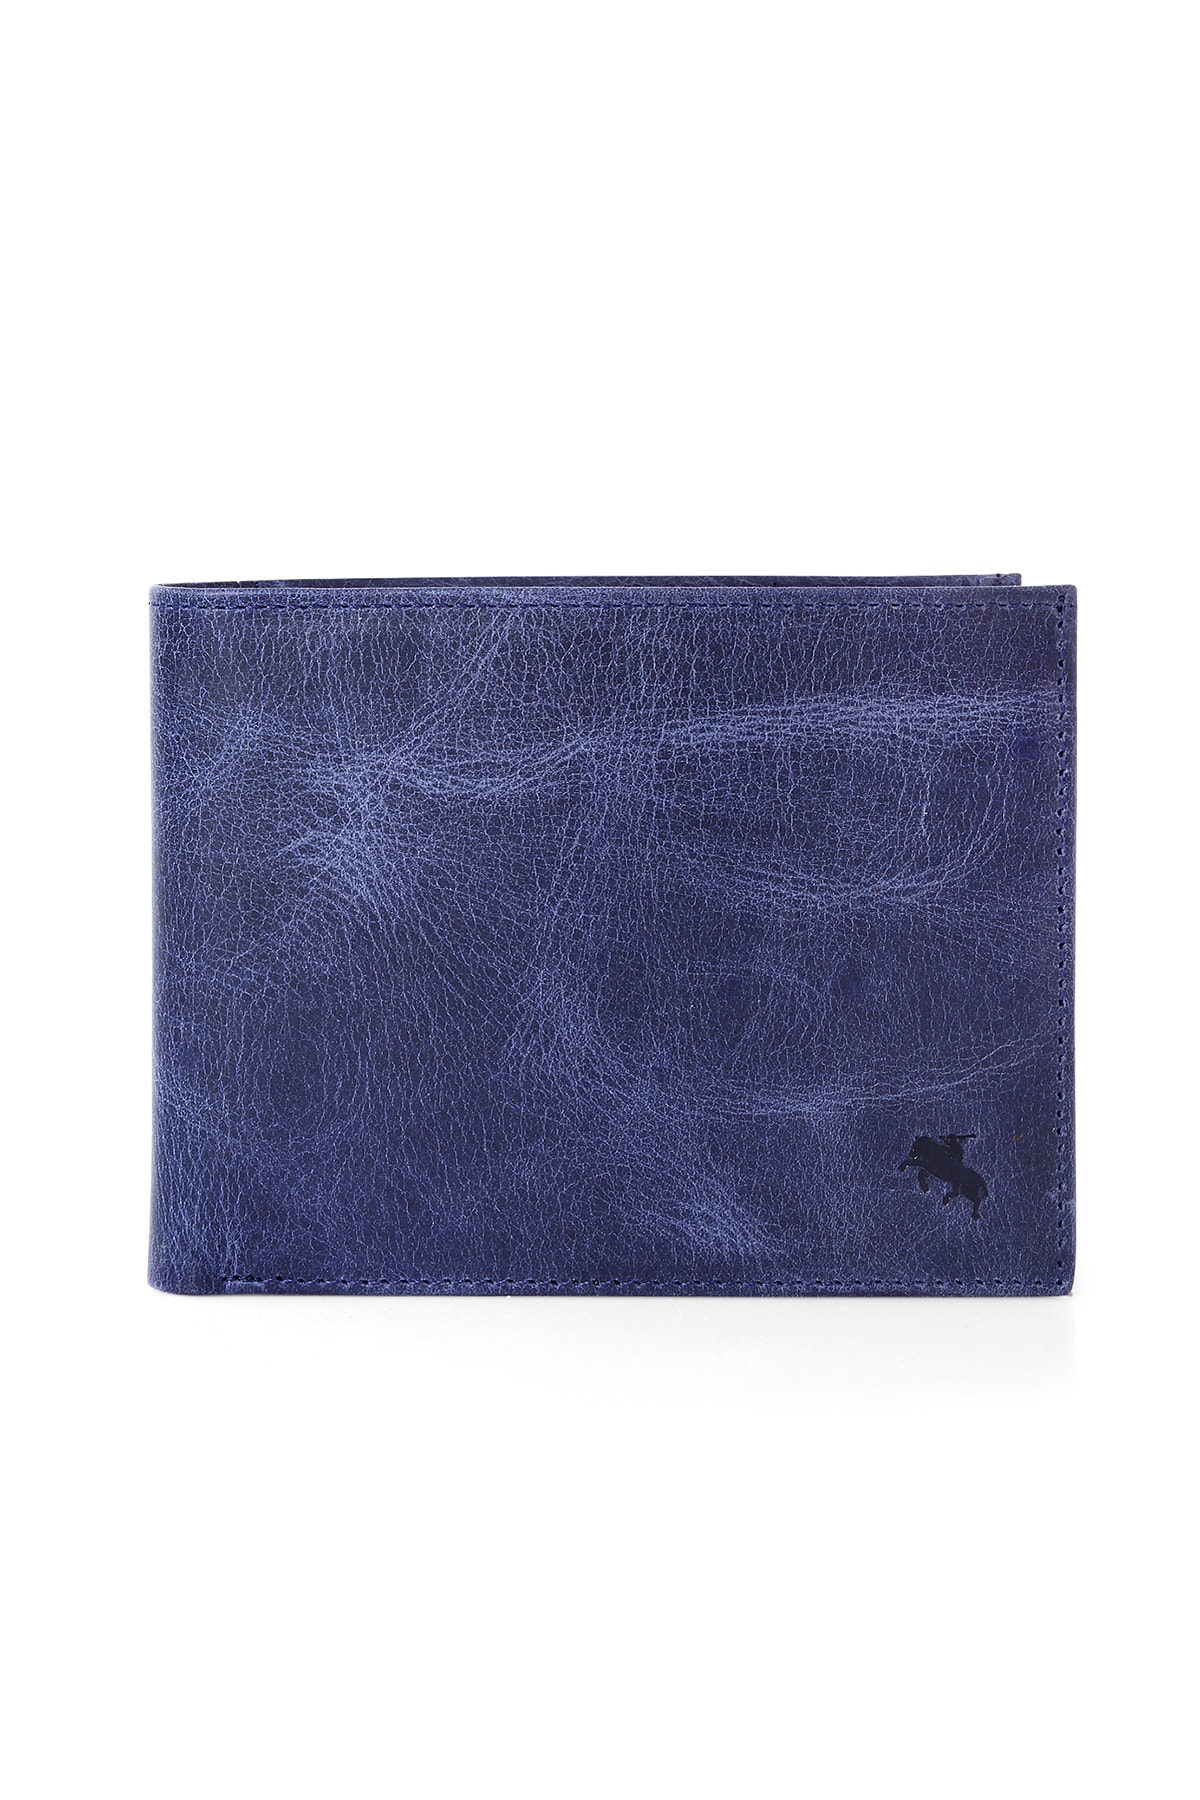 Polo Air Genuine Navy Blue Leather Wallet